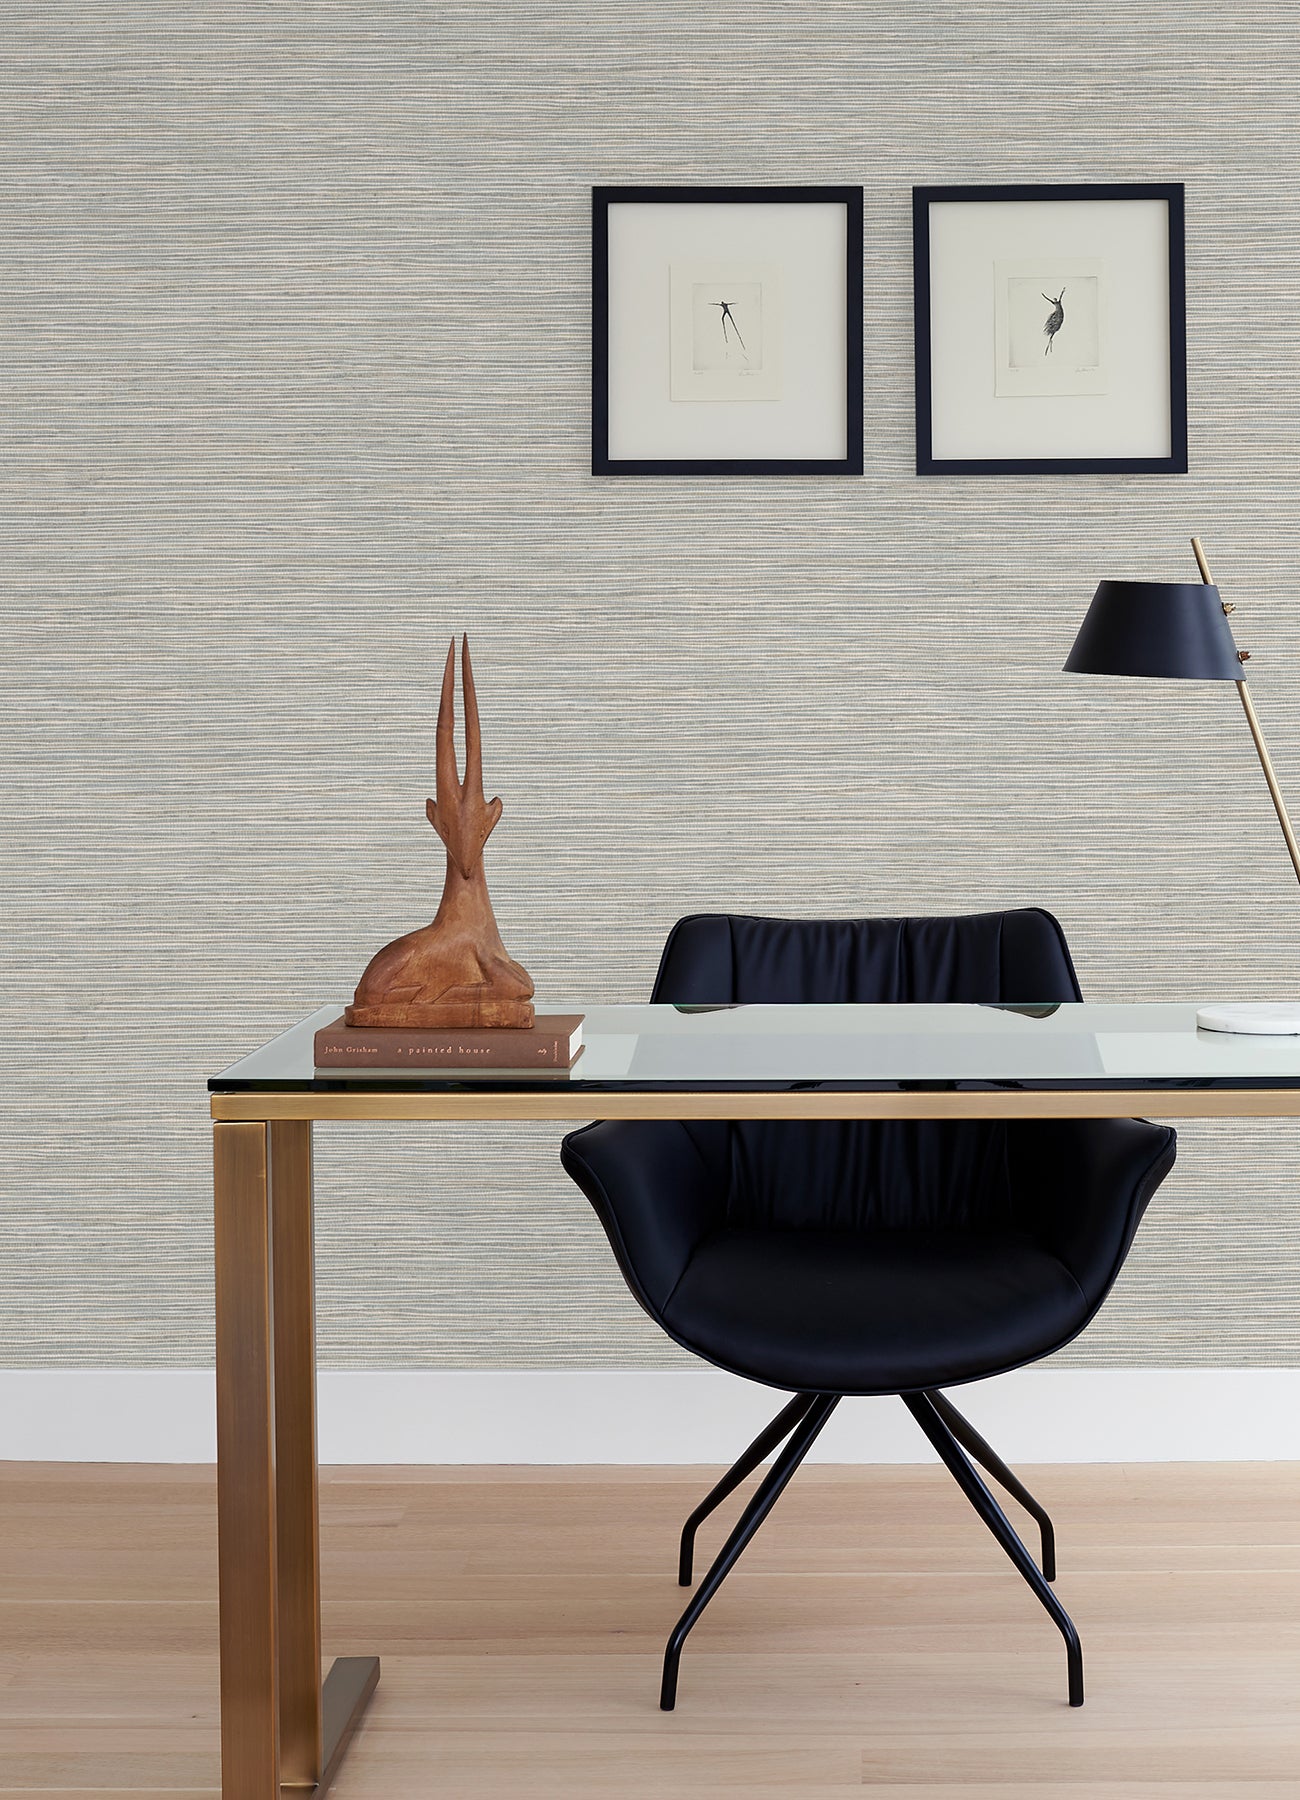 Dimensional Grasscloth Peel and Stick Wallpaper Peel and Stick Wallpaper RoomMates   